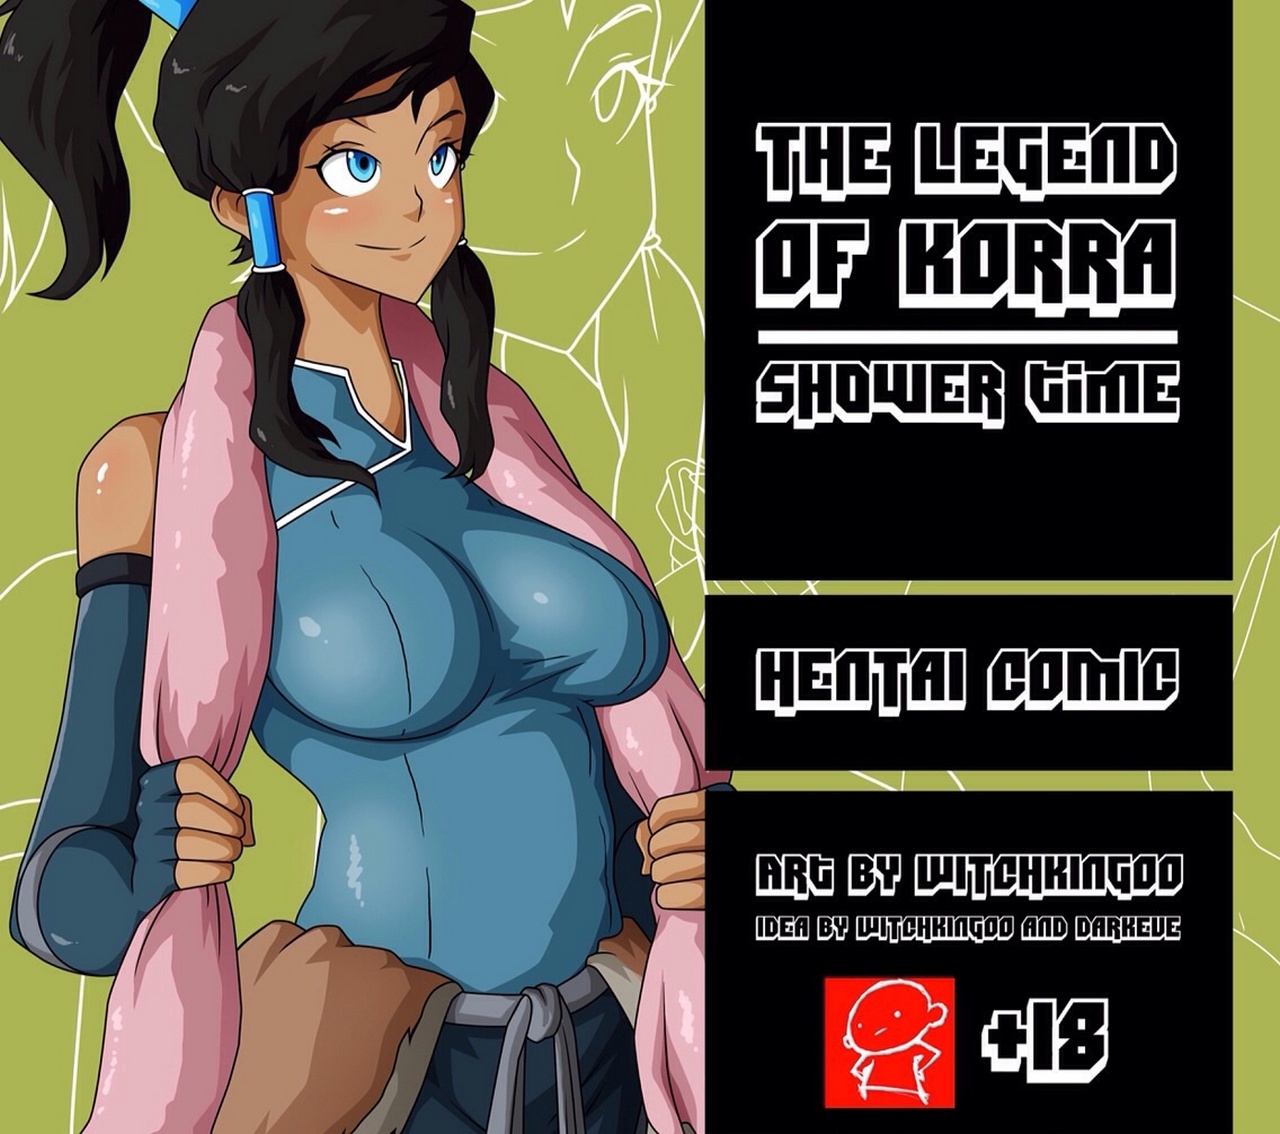 Avatar Korra Boobs Porn Captions - The Legend Of Korra - Shower Time (the legend of korra) porn comic by  [witchking00]. Big breasts porn comics.